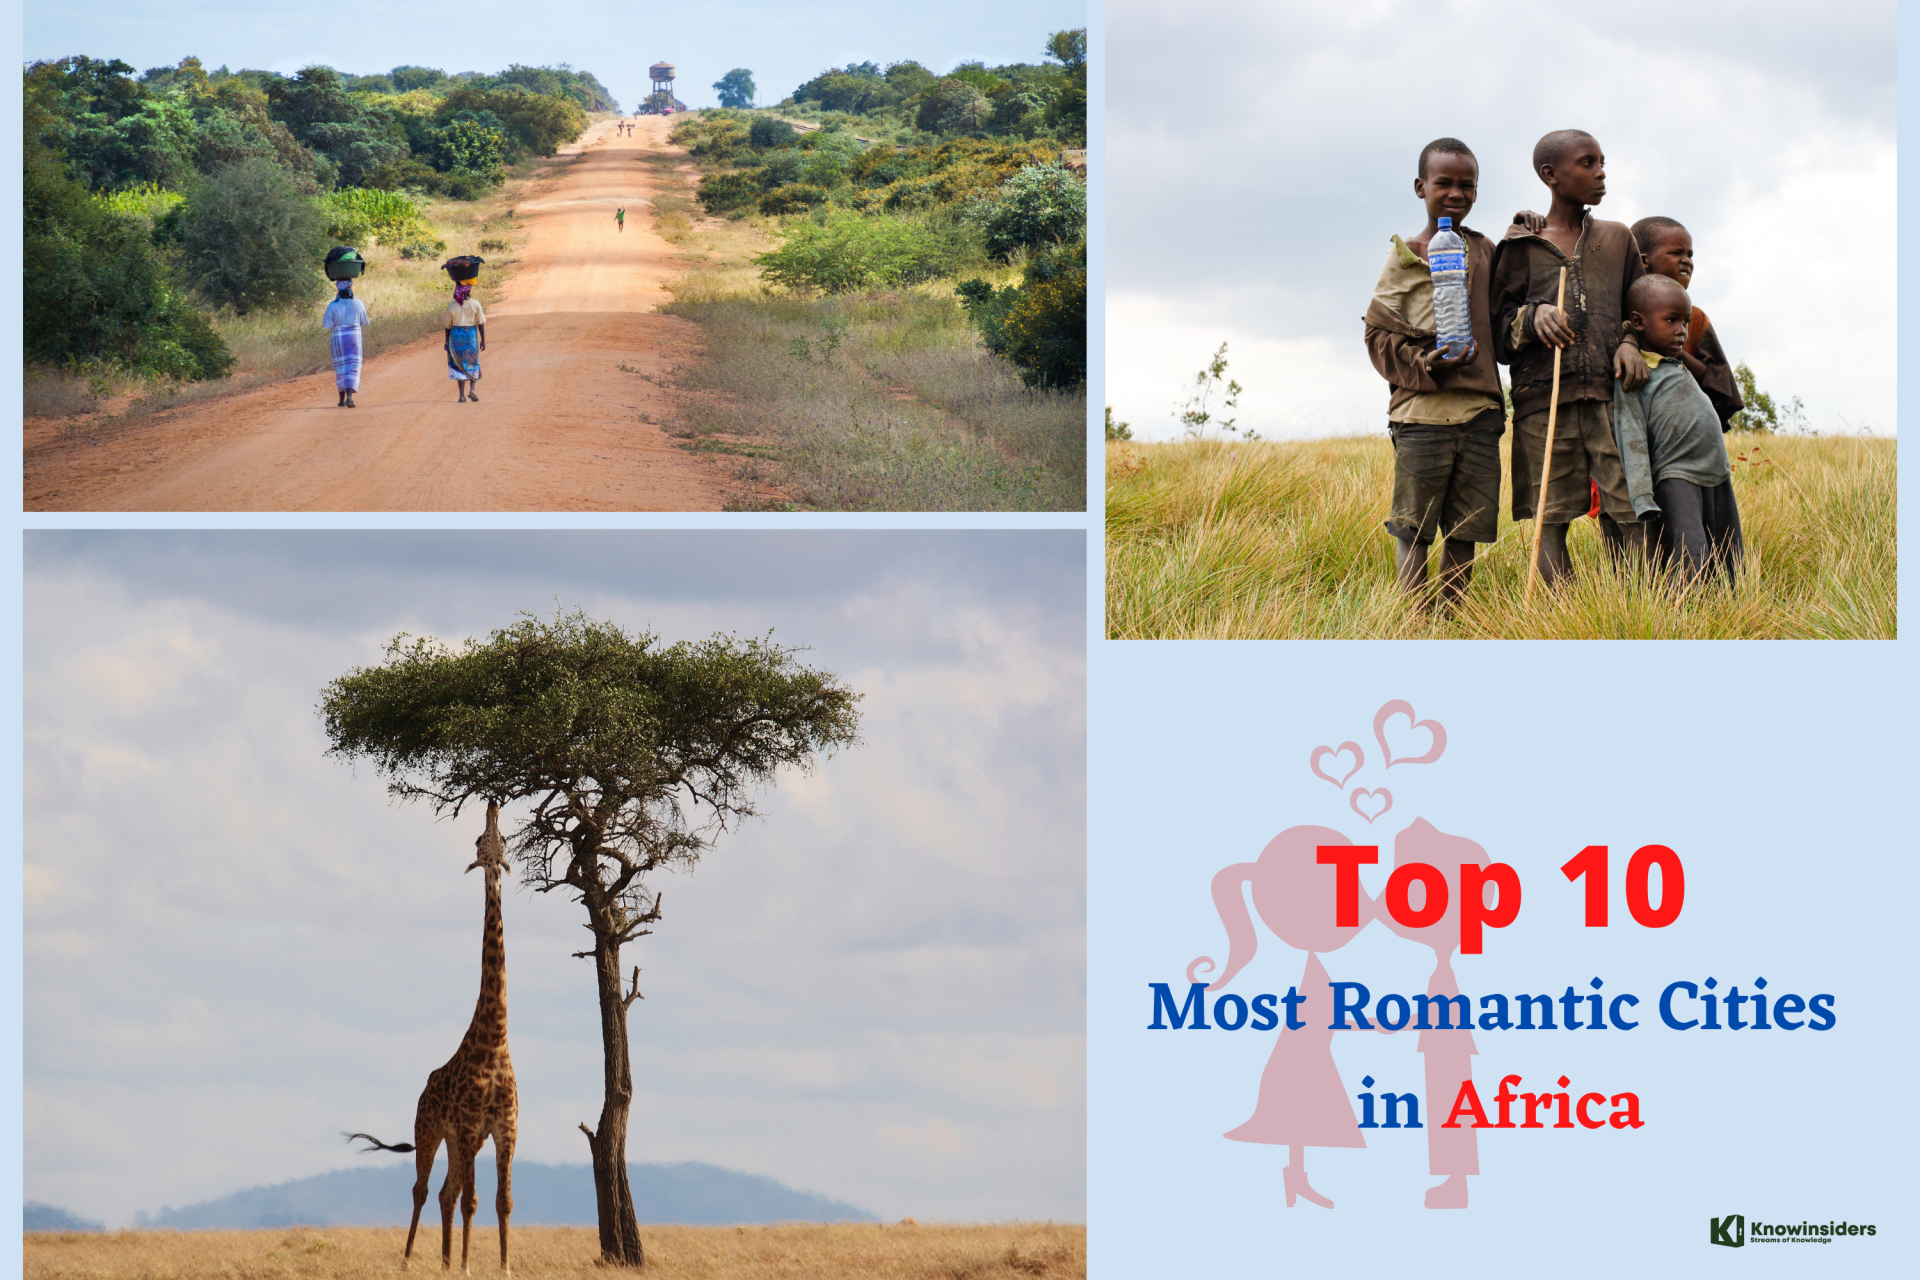 Top 10 Most Romantic Cities in Africa